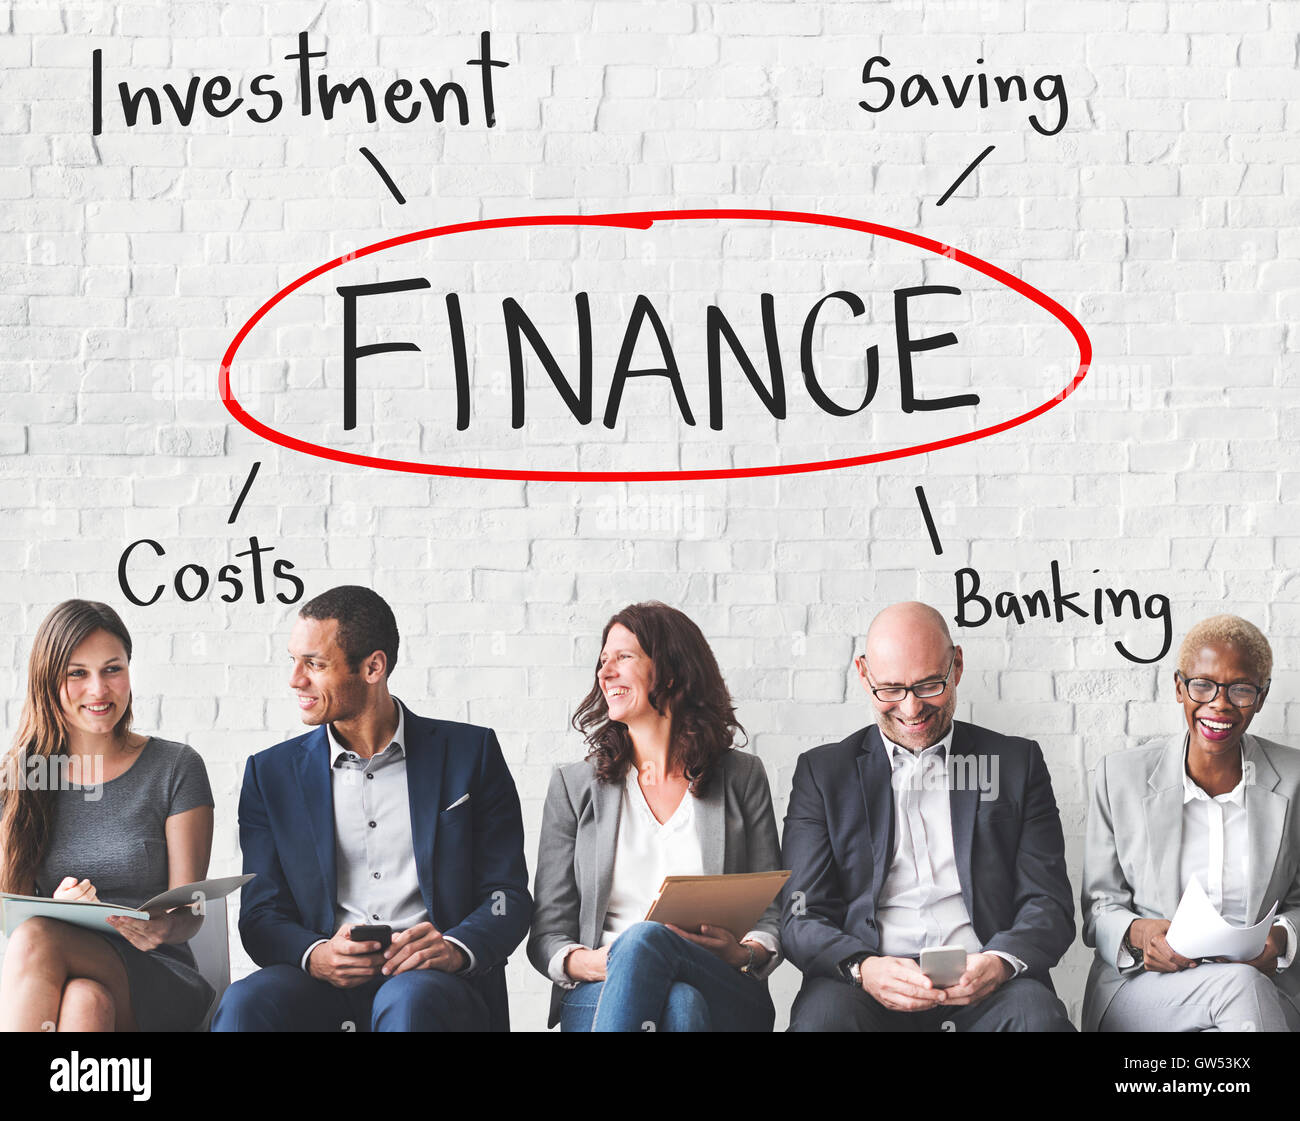 Finance Investment Banking Cost Concept Stock Photo